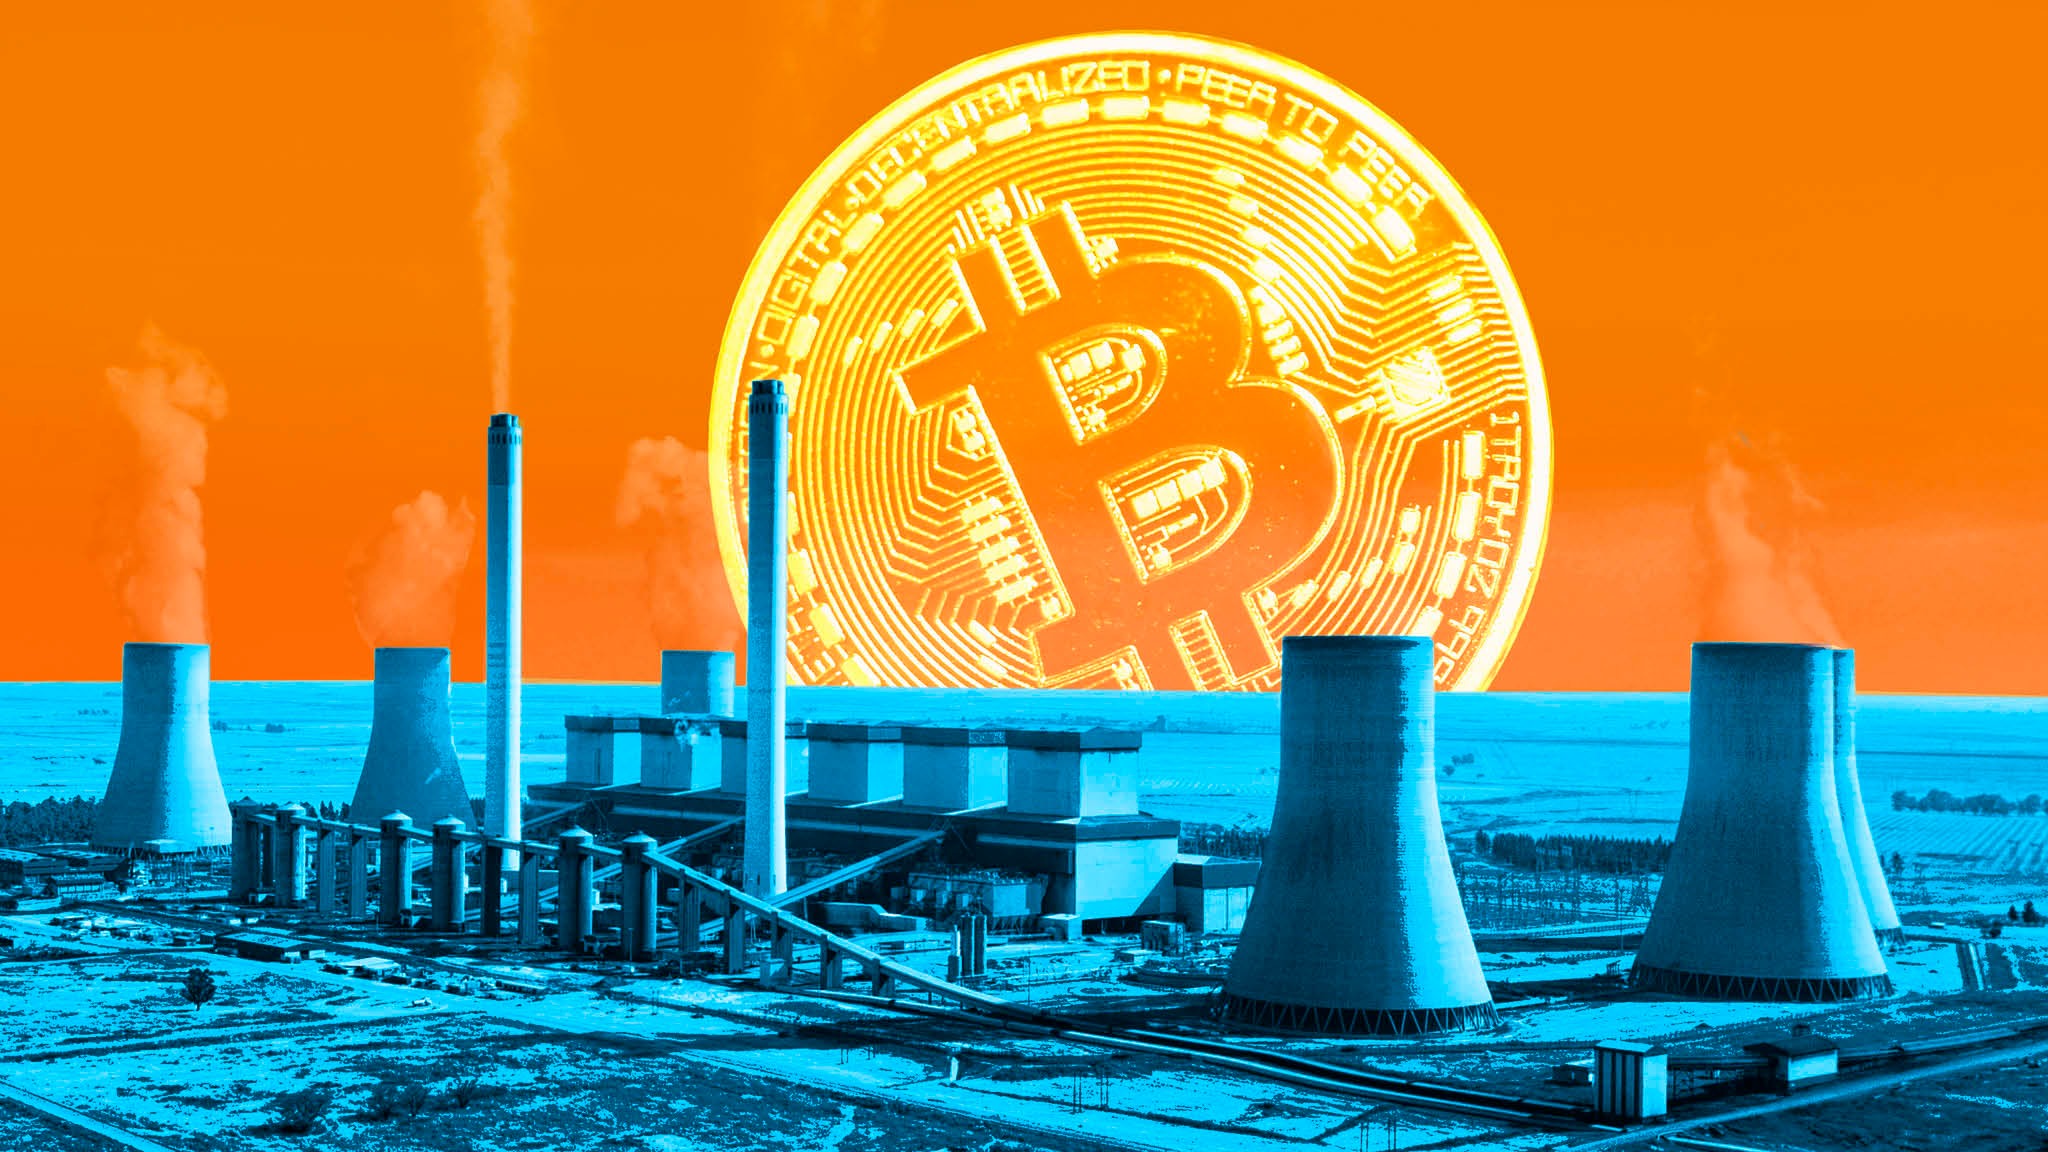 Bitcoin's growing energy problem: 'It's a dirty currency' | Financial Times